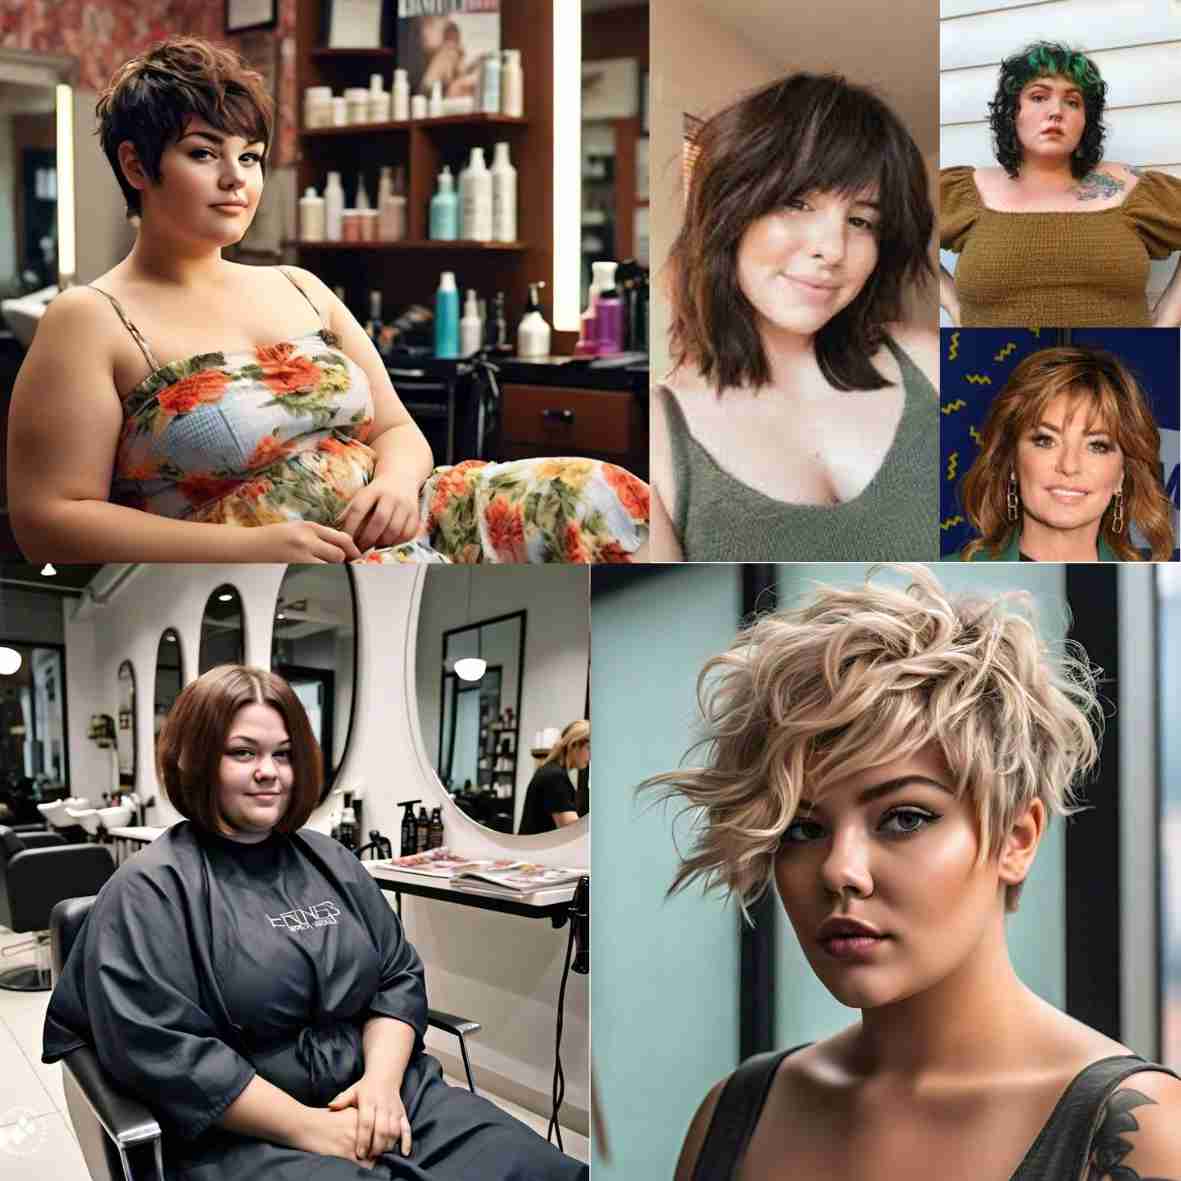 Sure! Here's an SEO-friendly alt text for the title "Short Haircuts for Large Women": "Short haircuts for plus-size women, stylish and flattering hairstyles for larger women"